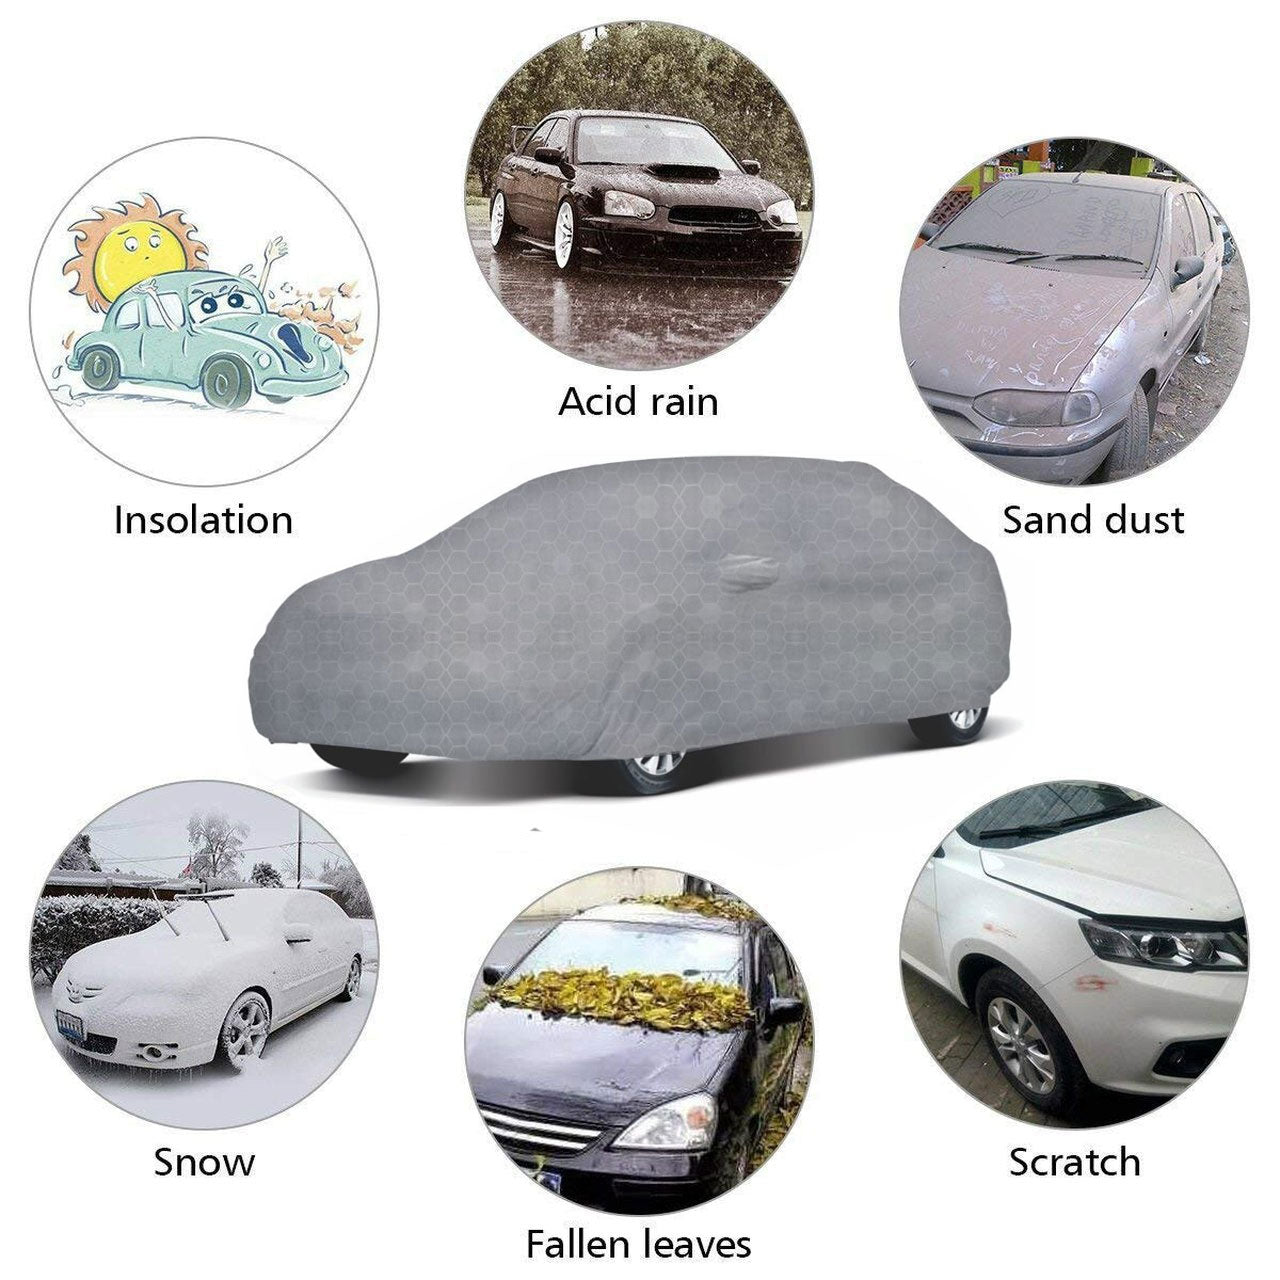 Oshotto 100% Dust Proof, Water Resistant Grey Car Body Cover with Mirror Pocket For BMW X1